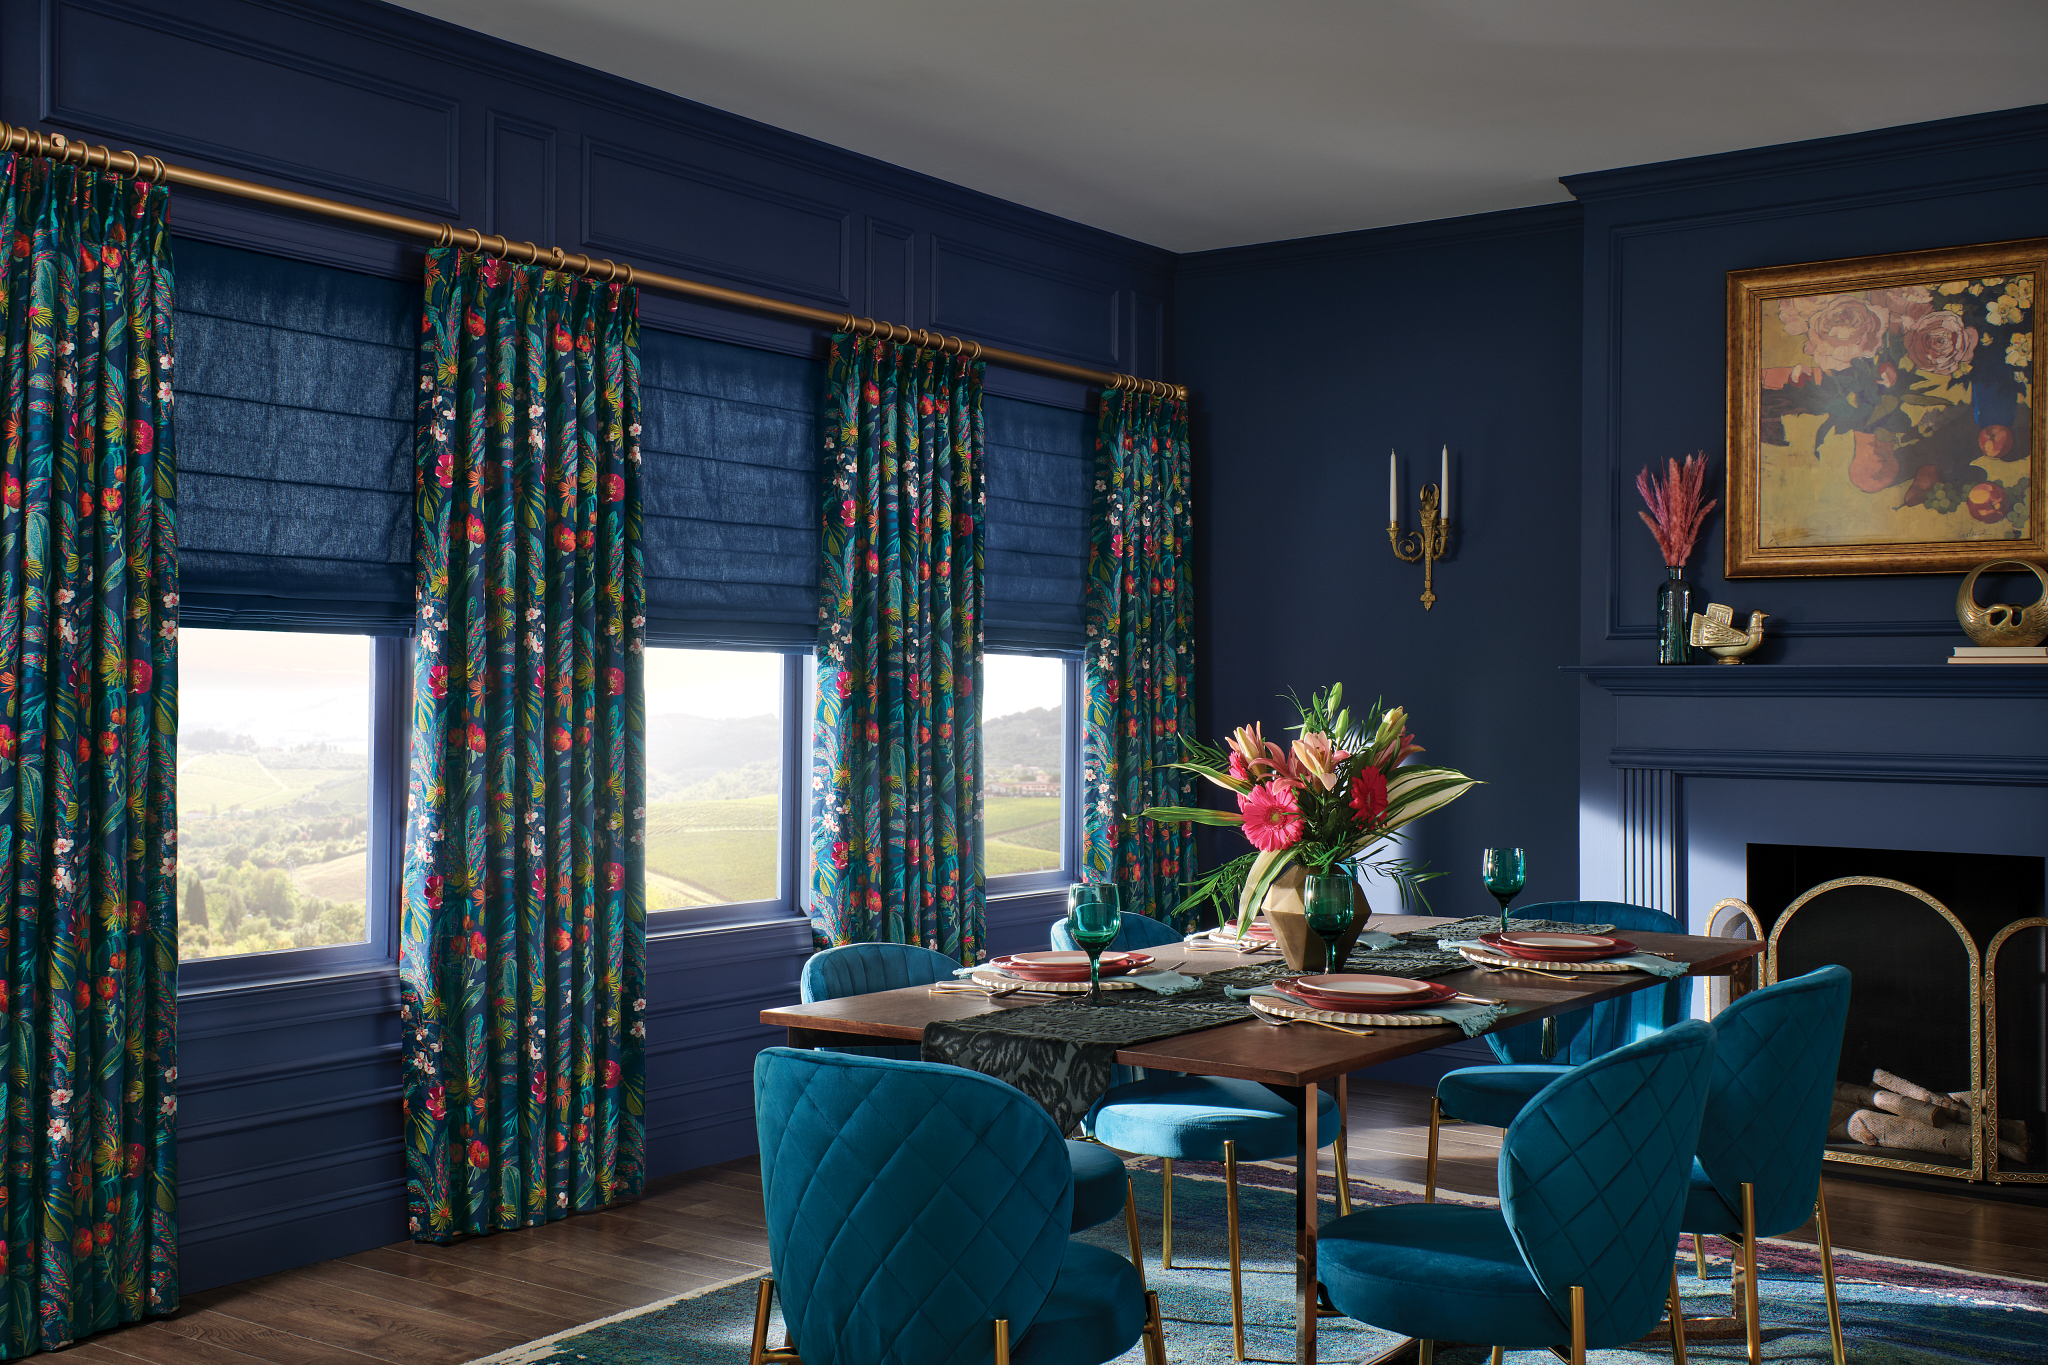 A dining room with blue walls, blue floral-patterned curtains from Windows Dressed Up Design Studio, and a wooden table set for six. A vase with flowers graces the table, while a painting and sconces adorn the walls.